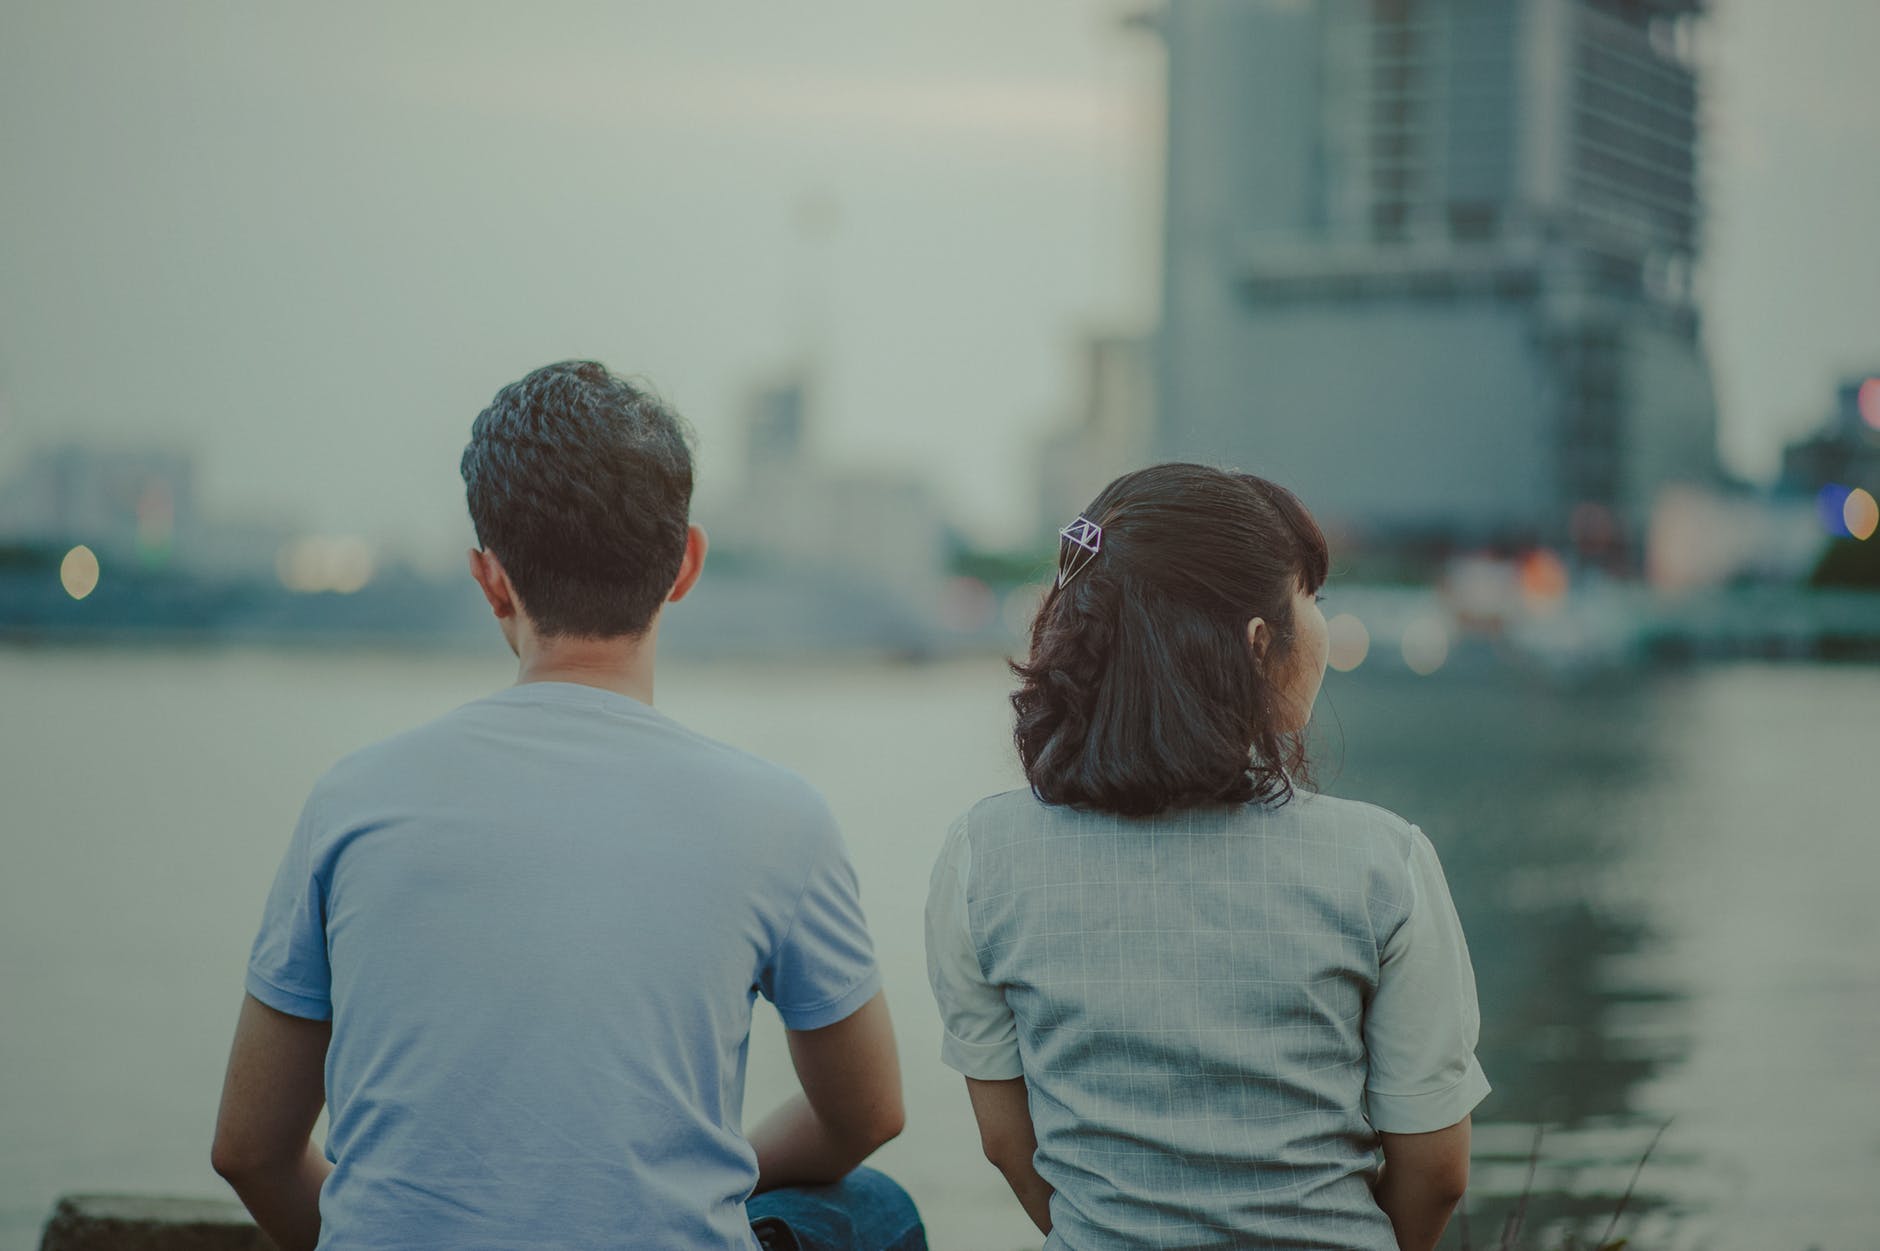 Selective focus photography of man and woman watching body of water and concrete buildings